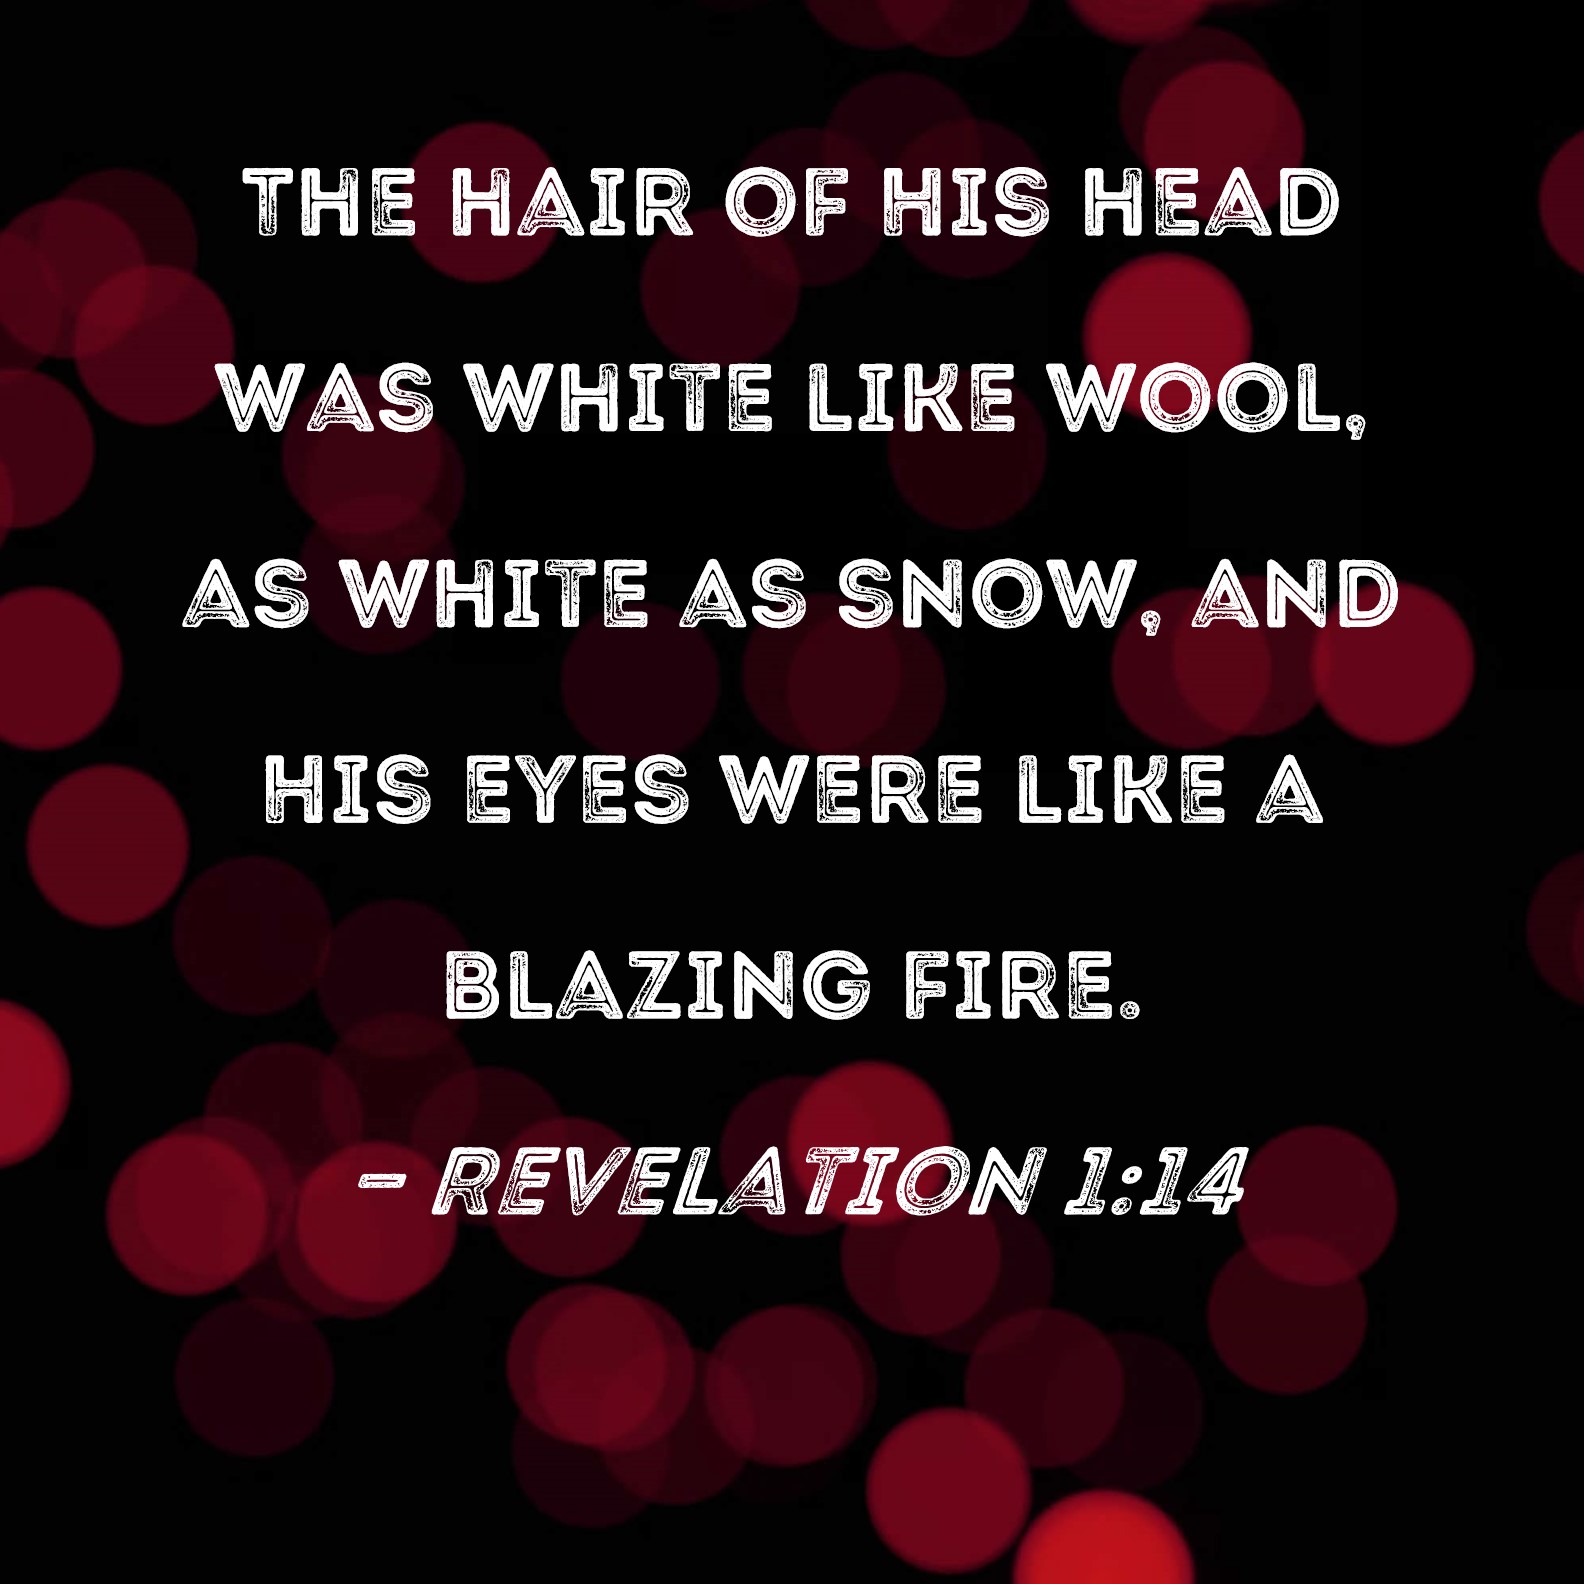 Revelation 1:14 The hair of His head was white like wool, as white as snow,  and His eyes were like a blazing fire.